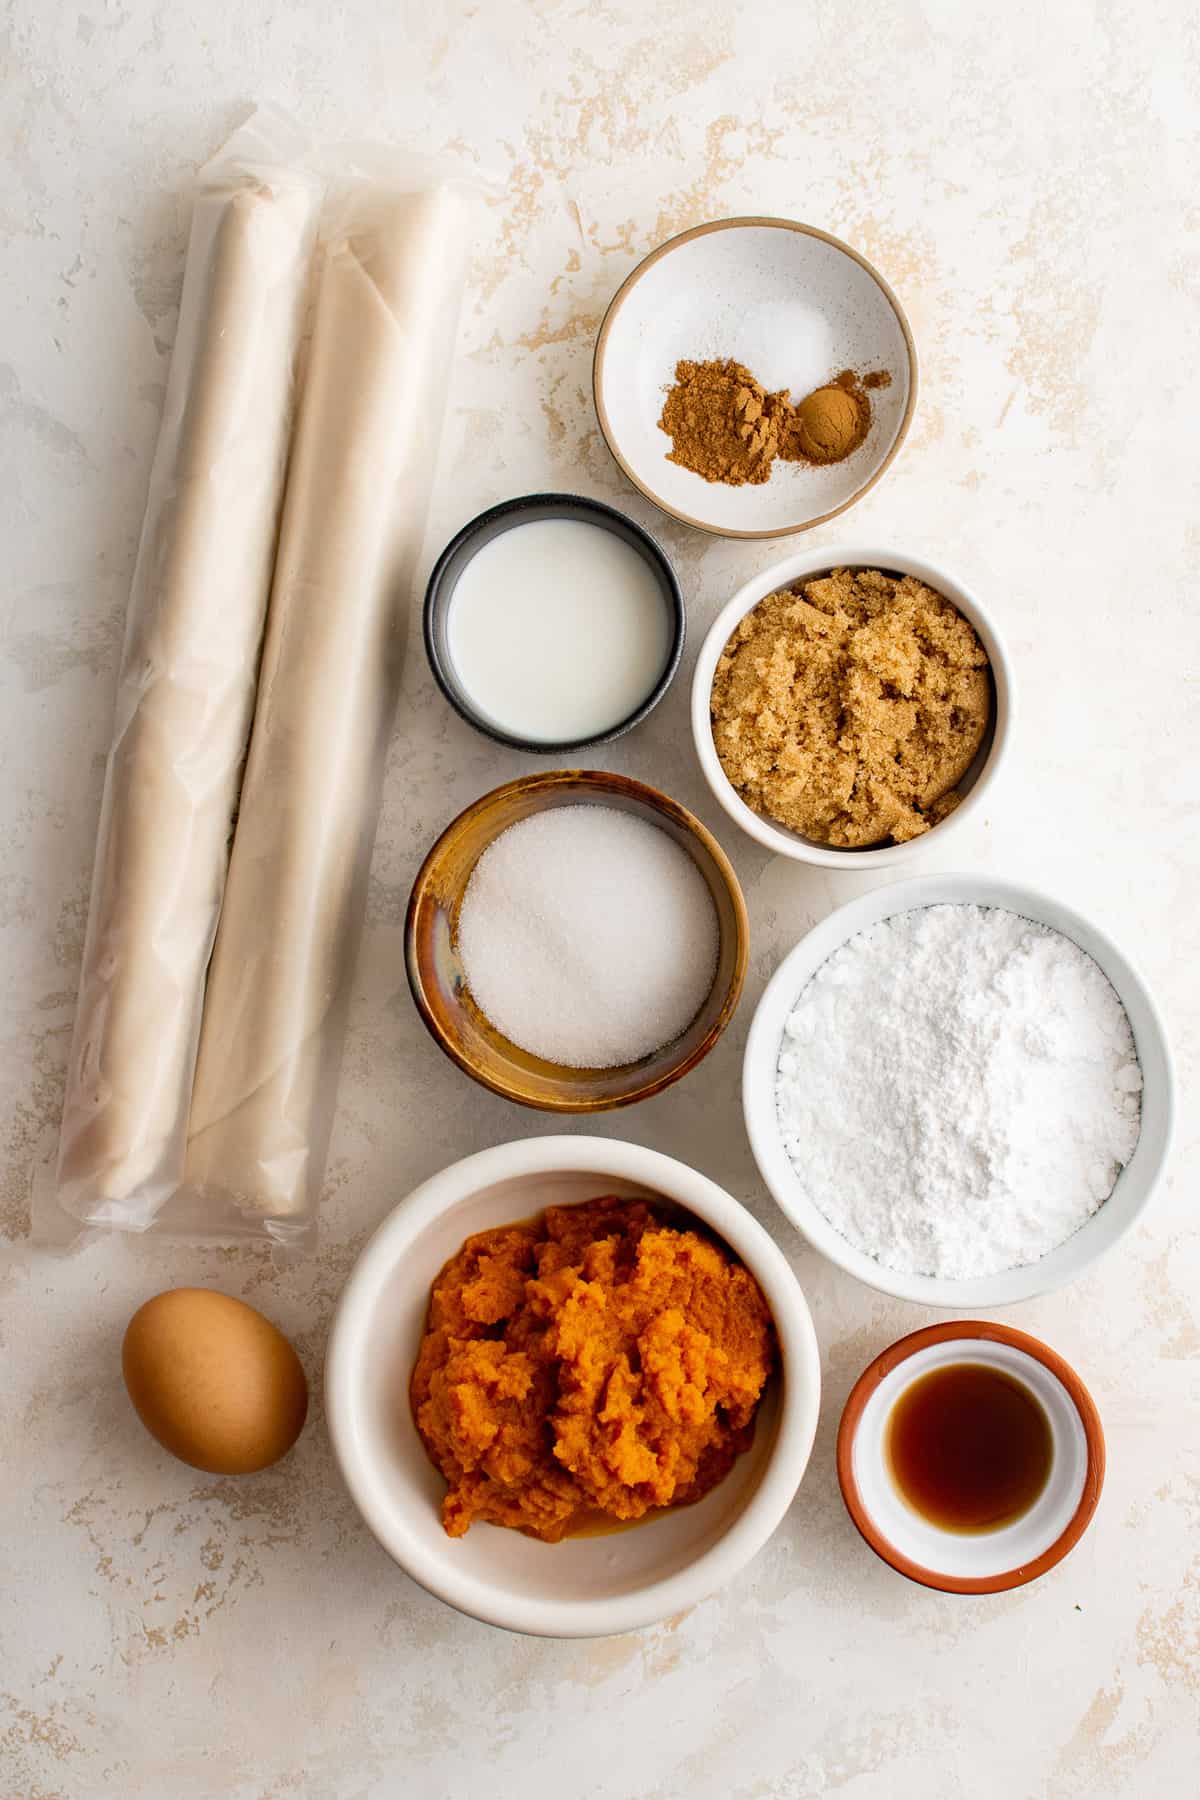 Overhead view of ingredients needed for recipe including pie crusts and pumpkin puree.